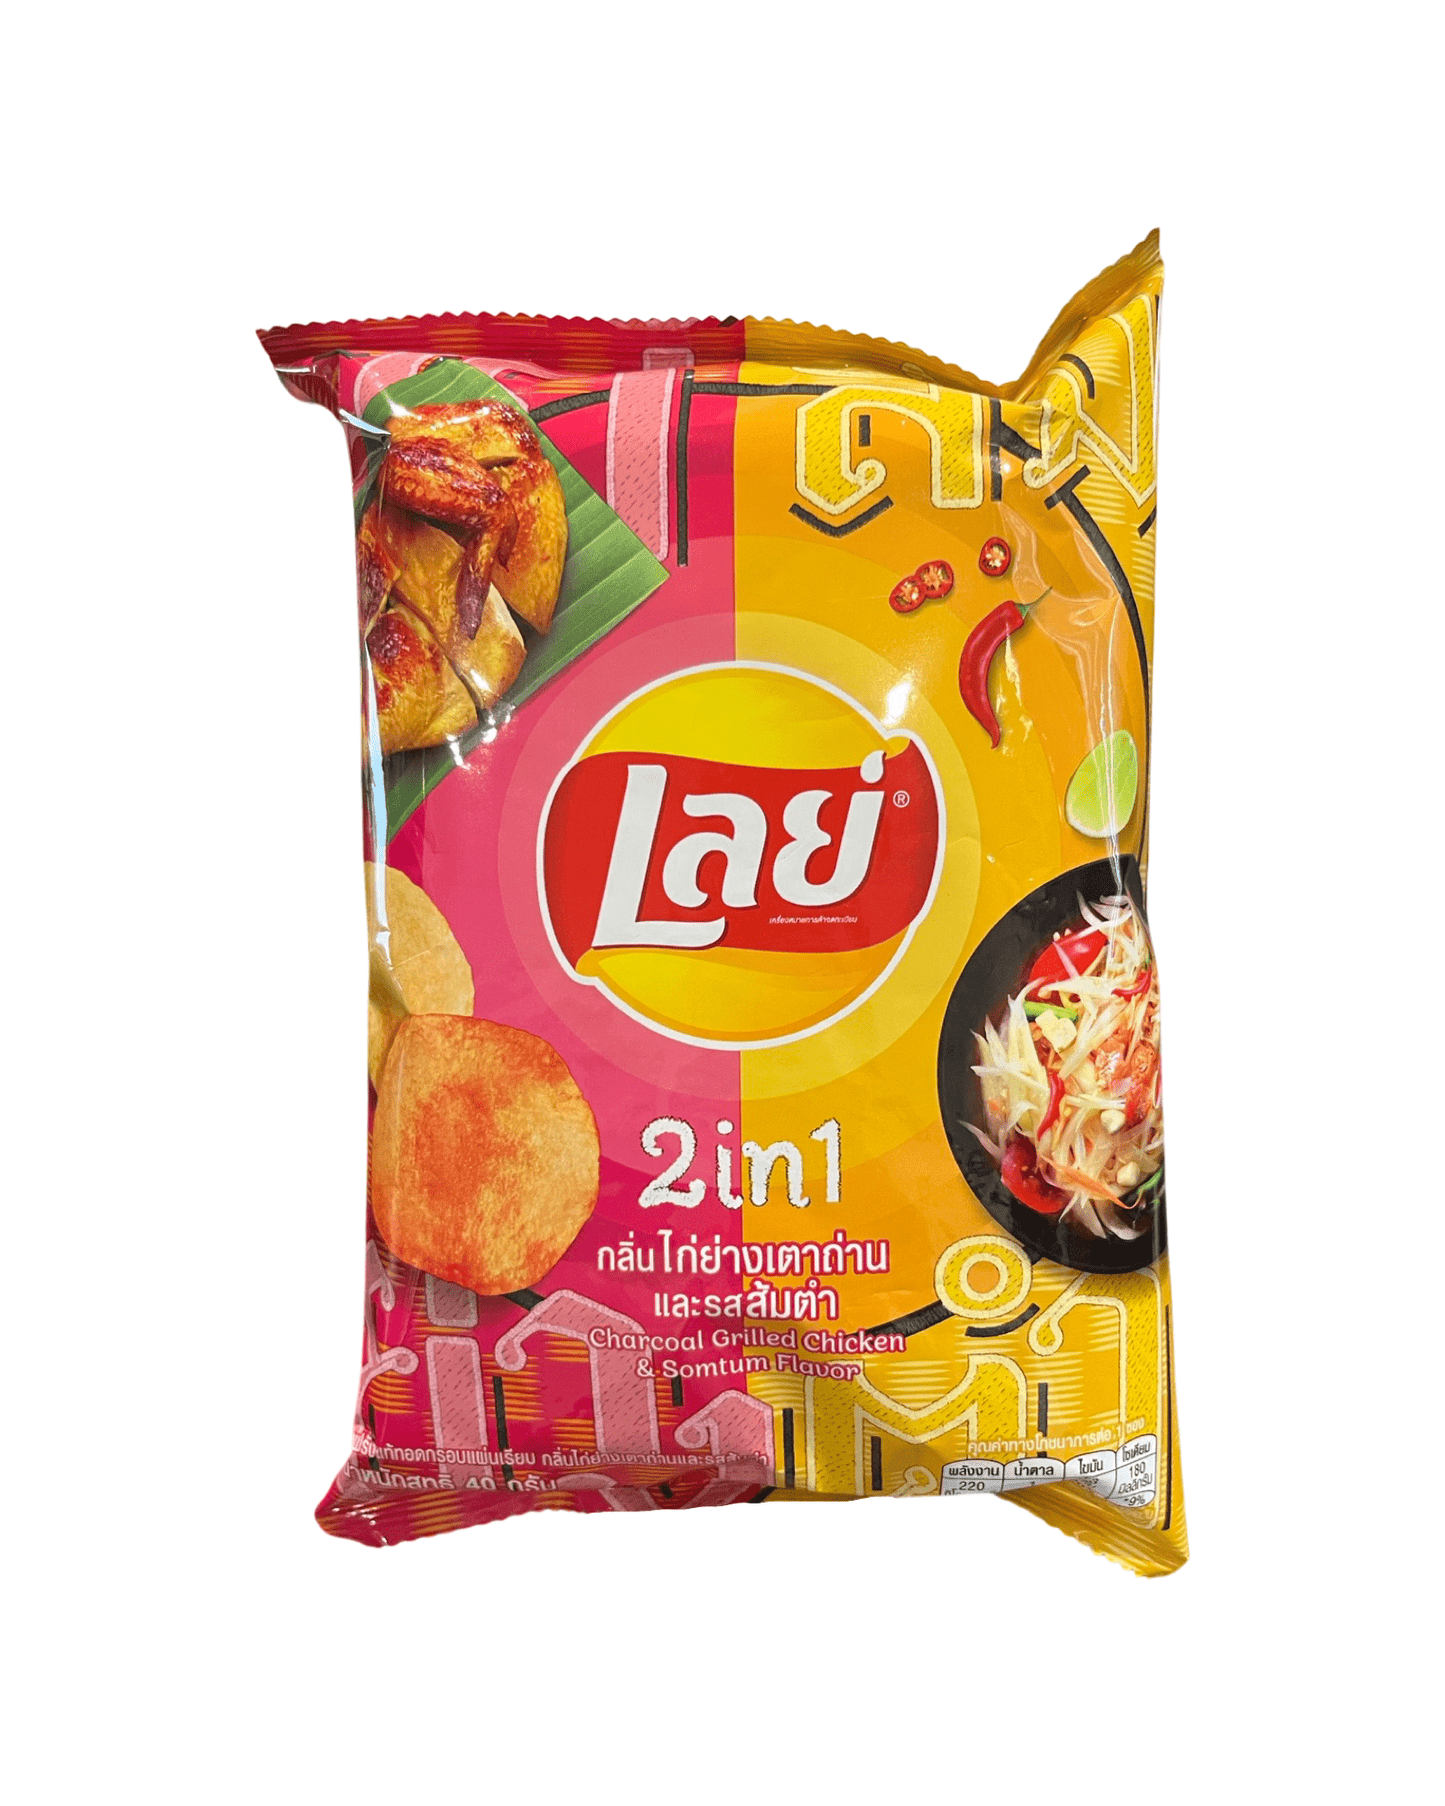 Lays 2-in-1 “Grilled Chicken & Somtum” (Thai) - Exotic Soda Company